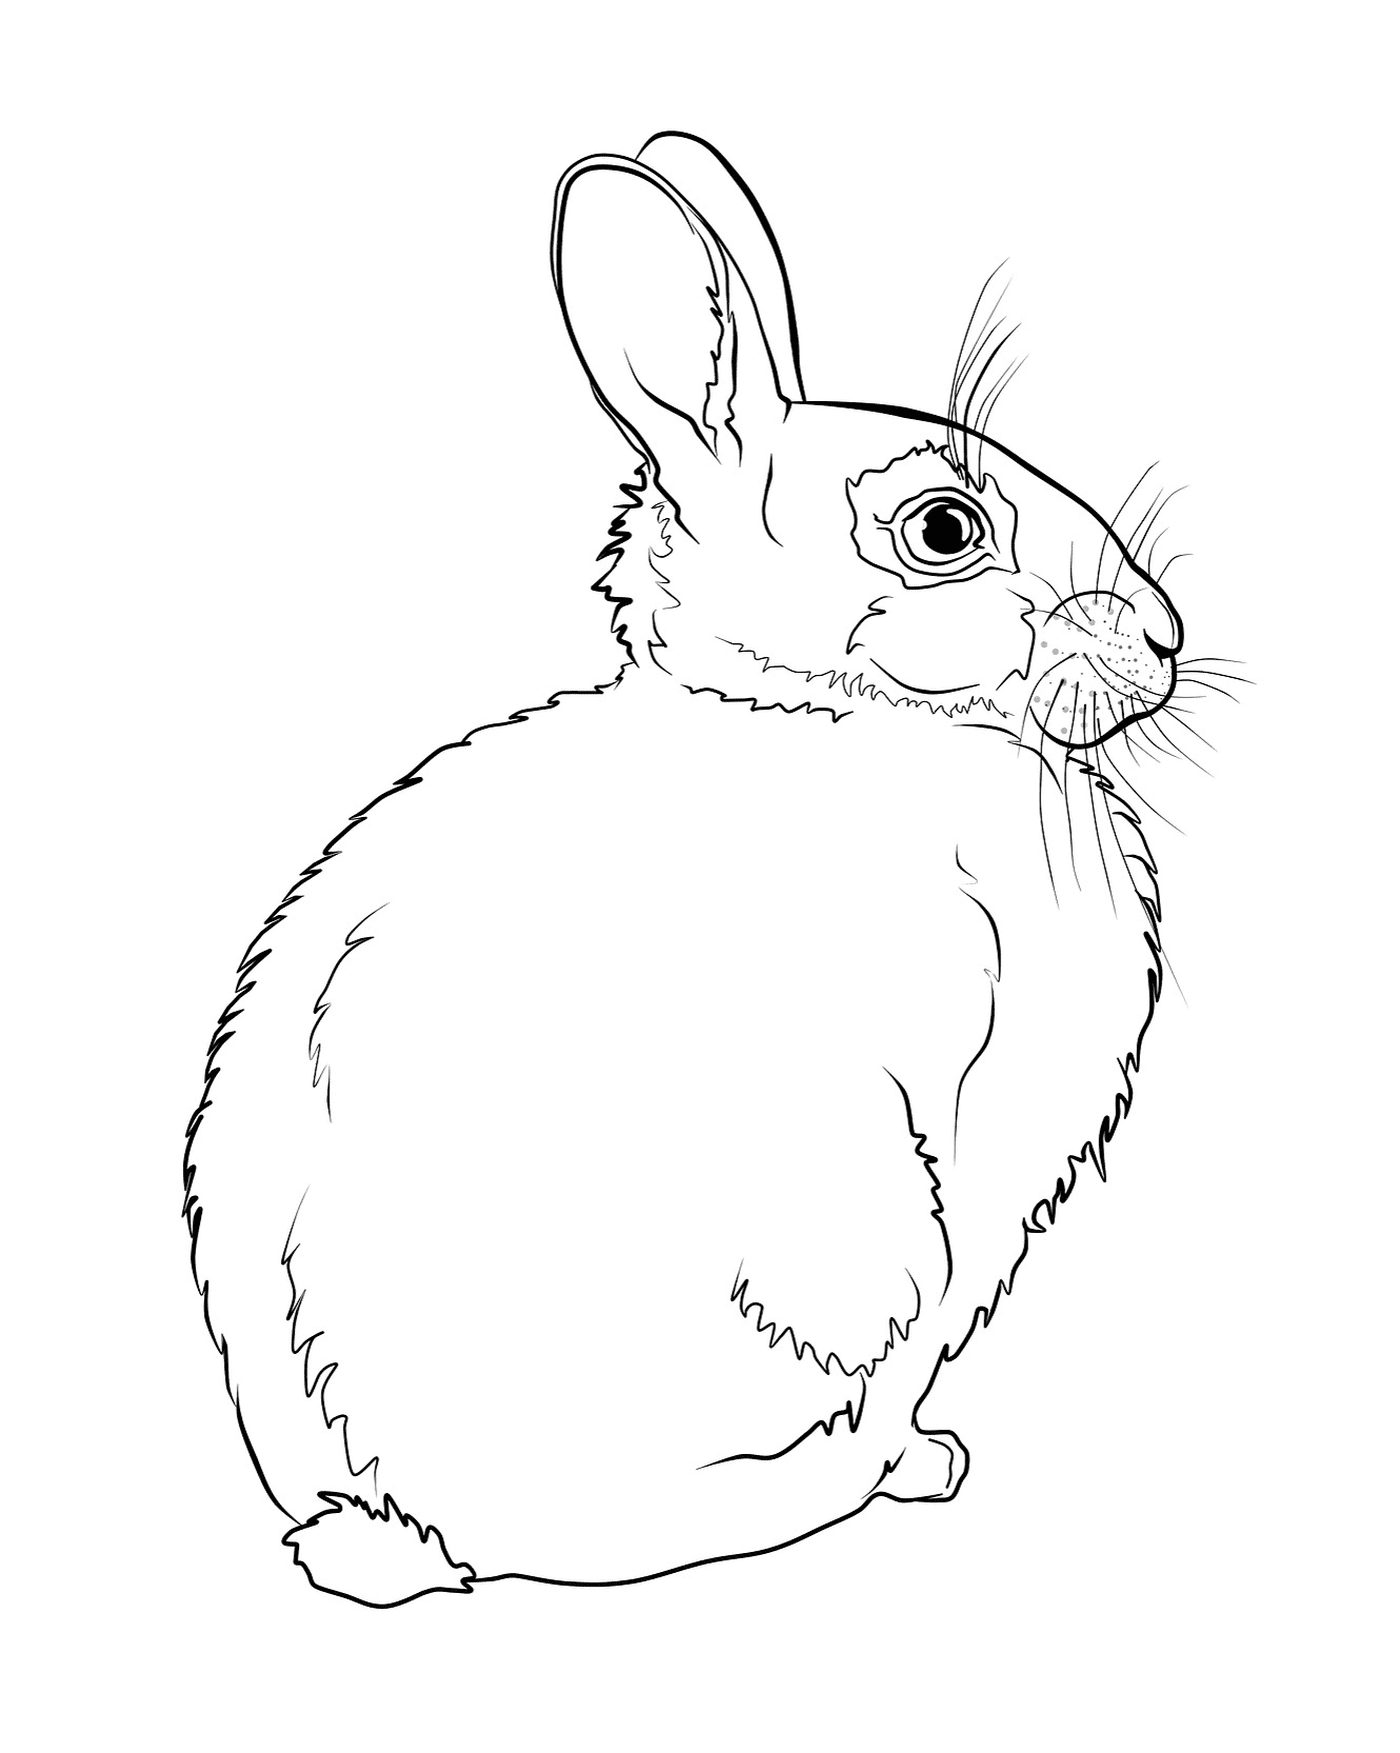  Realist rabbit seen from the back 